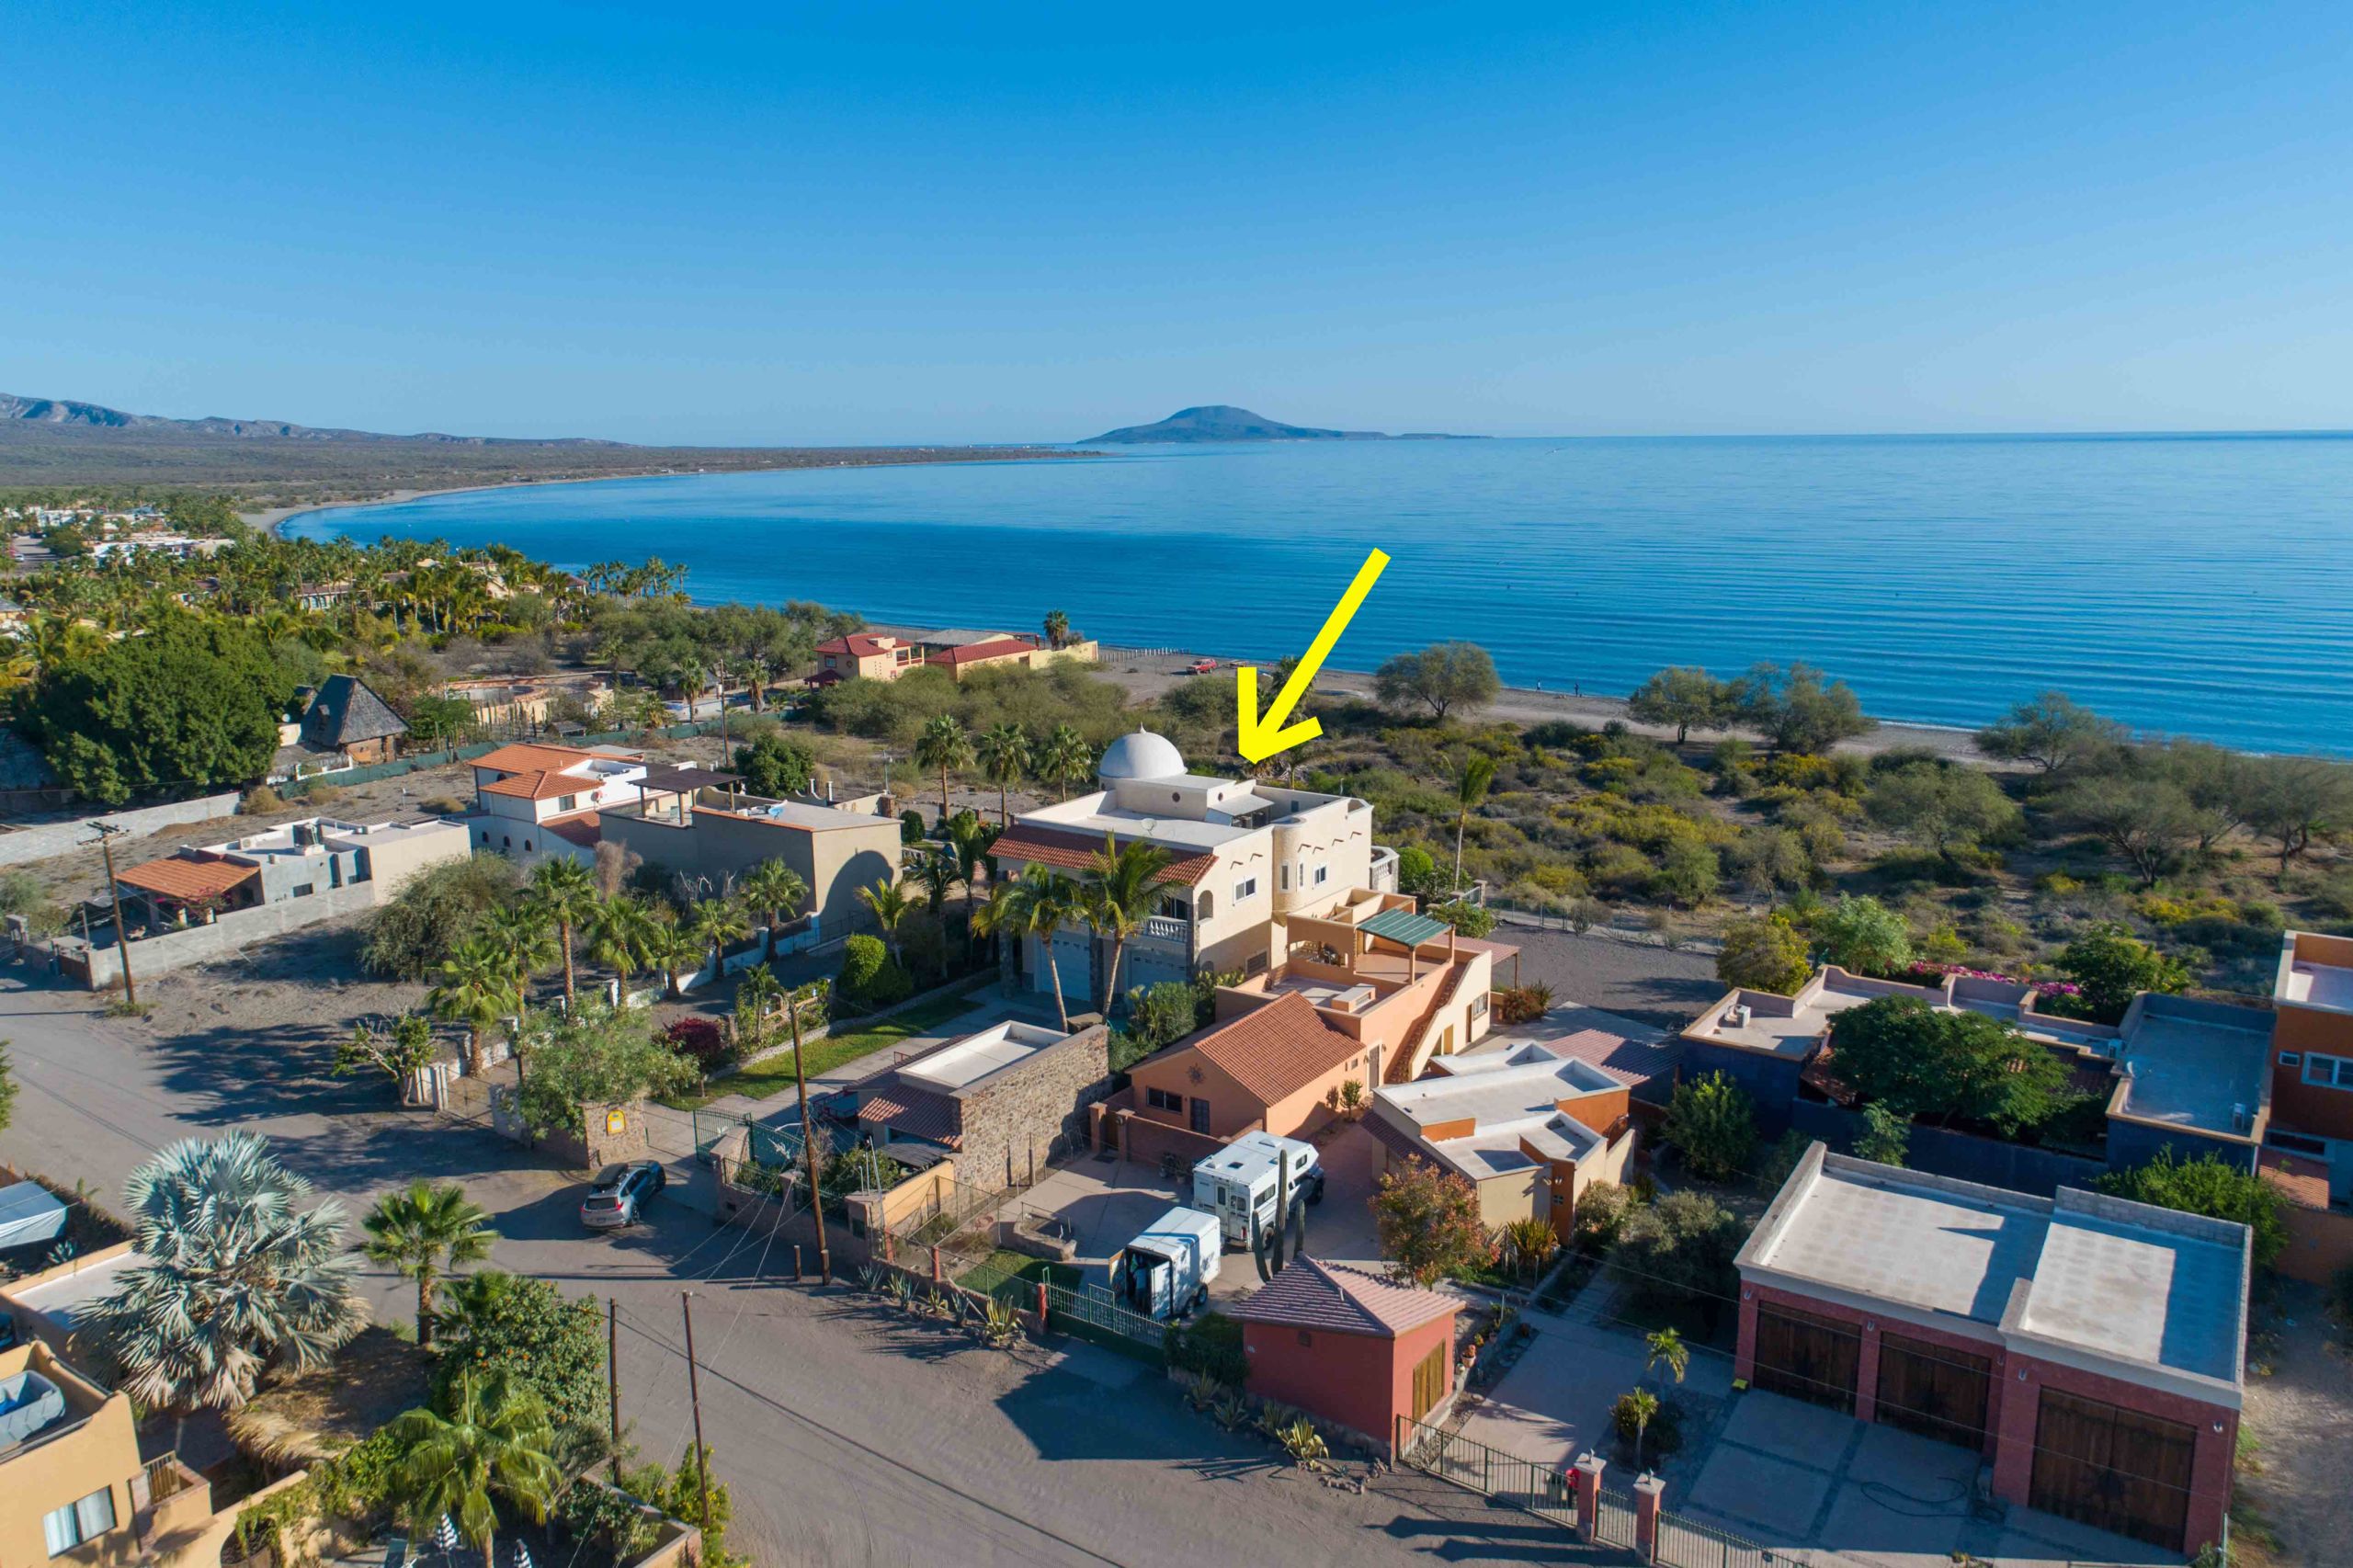 Stunning Sea and Island Views From This Incredibly Well Built Home in Loreto Baja Sur: Casa Sirena image spot.